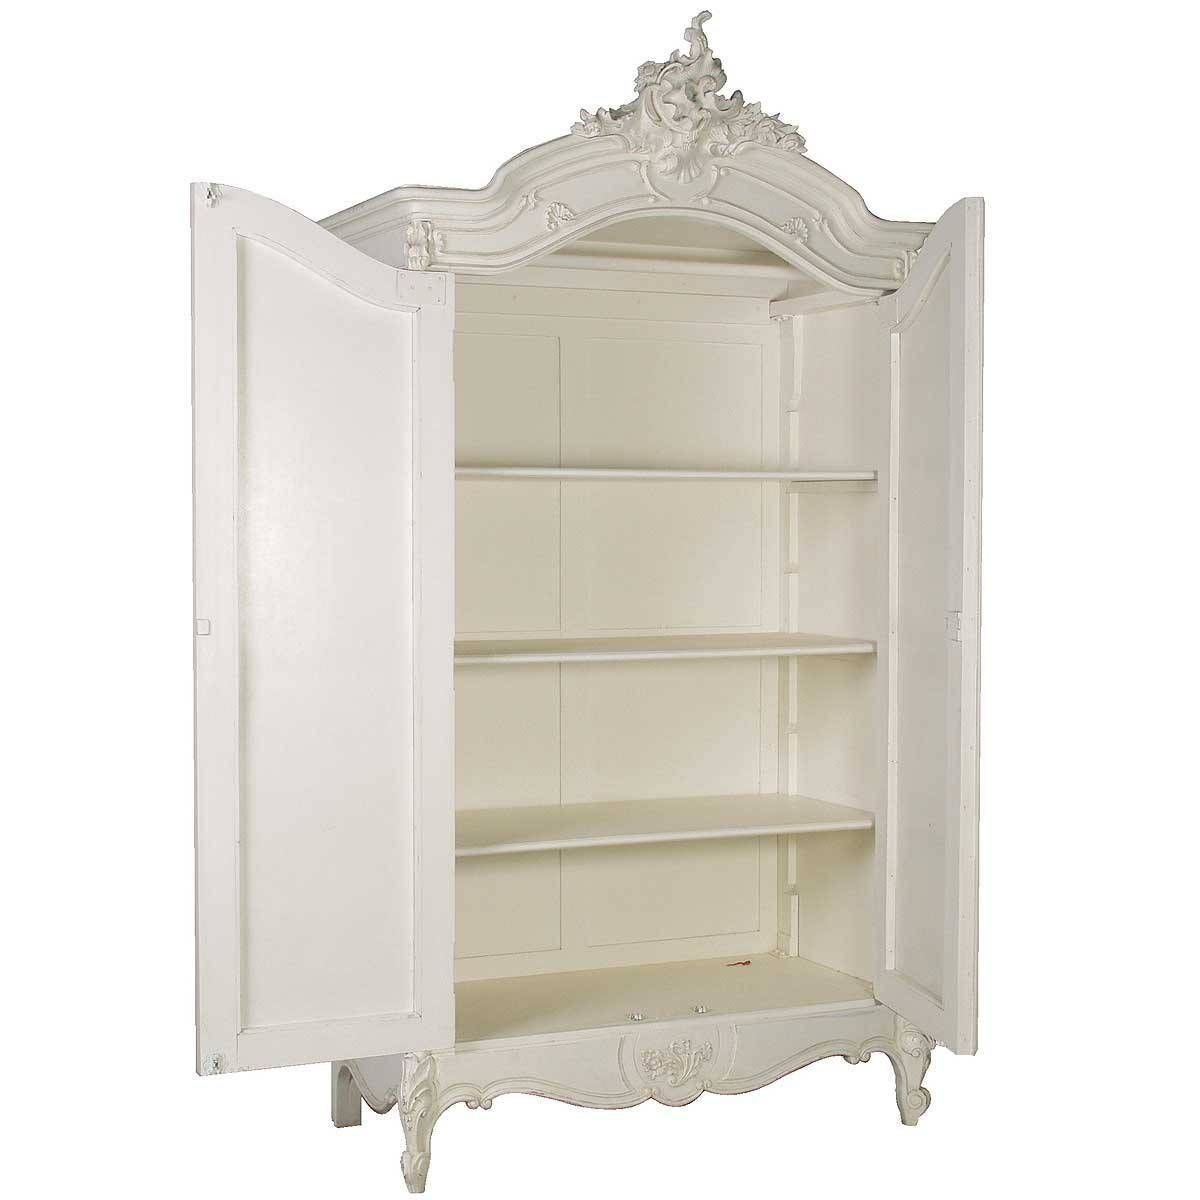 Provencal 2 Door Mirrored French Armoire | Armoire Throughout French Armoire Wardrobes (View 15 of 15)